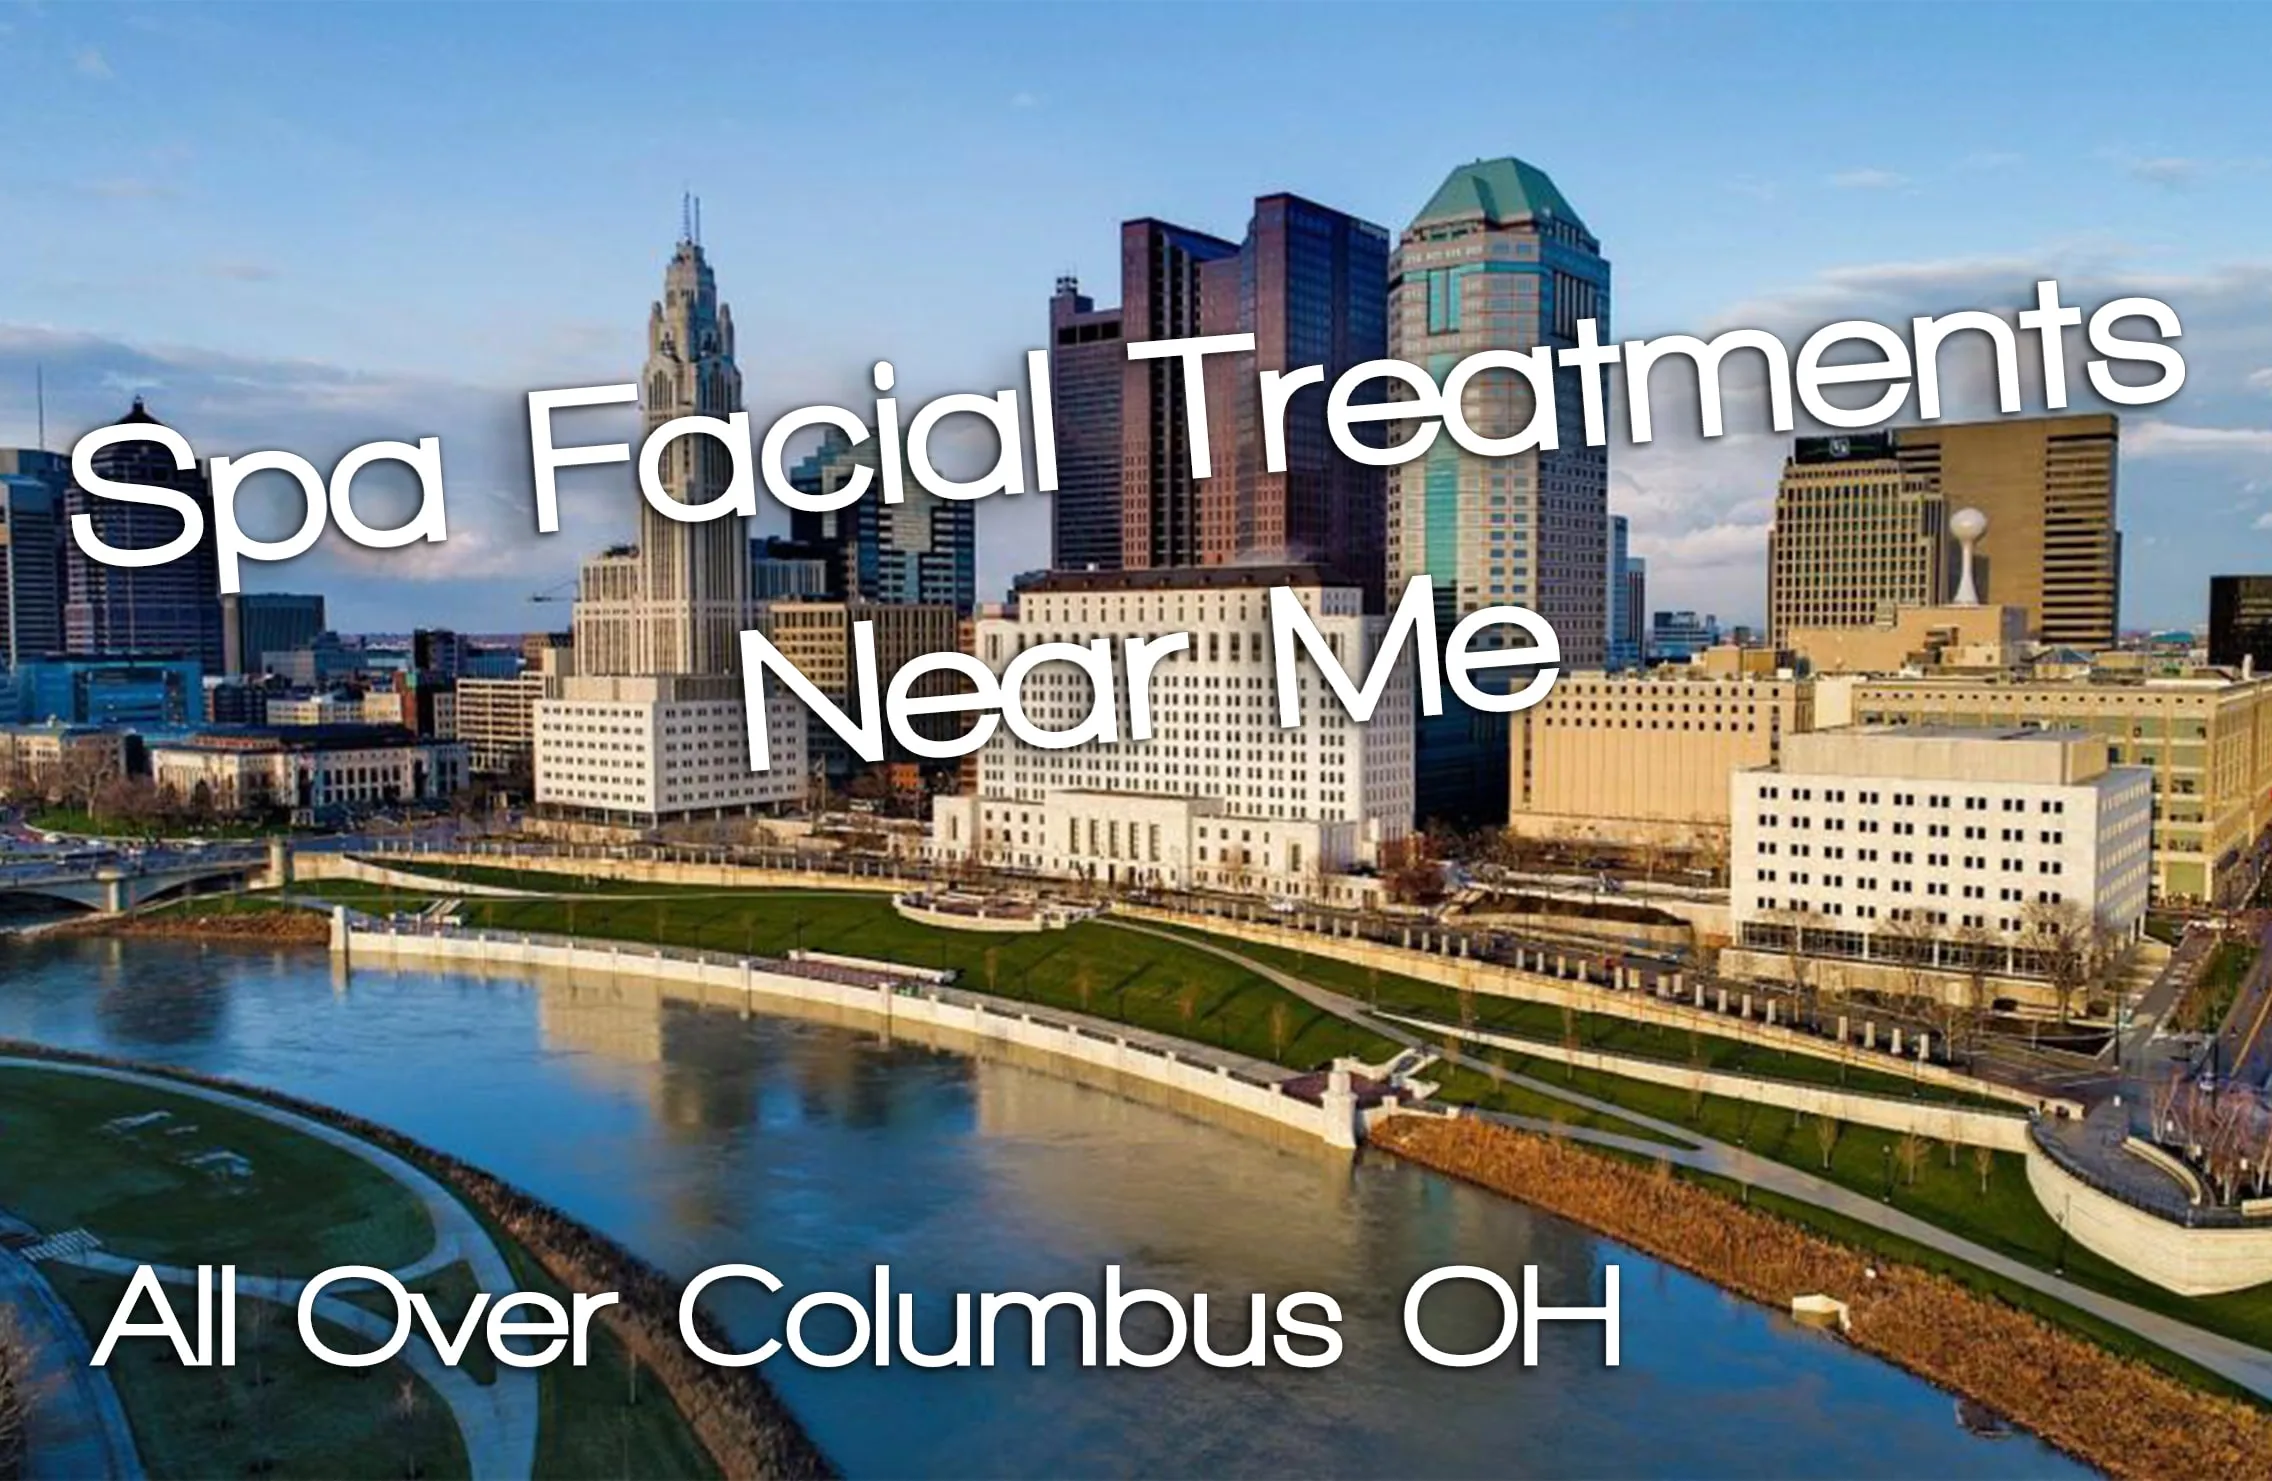 The Best Spa Facial Treatments All Over Columbus OH-Mediterranean Beauty